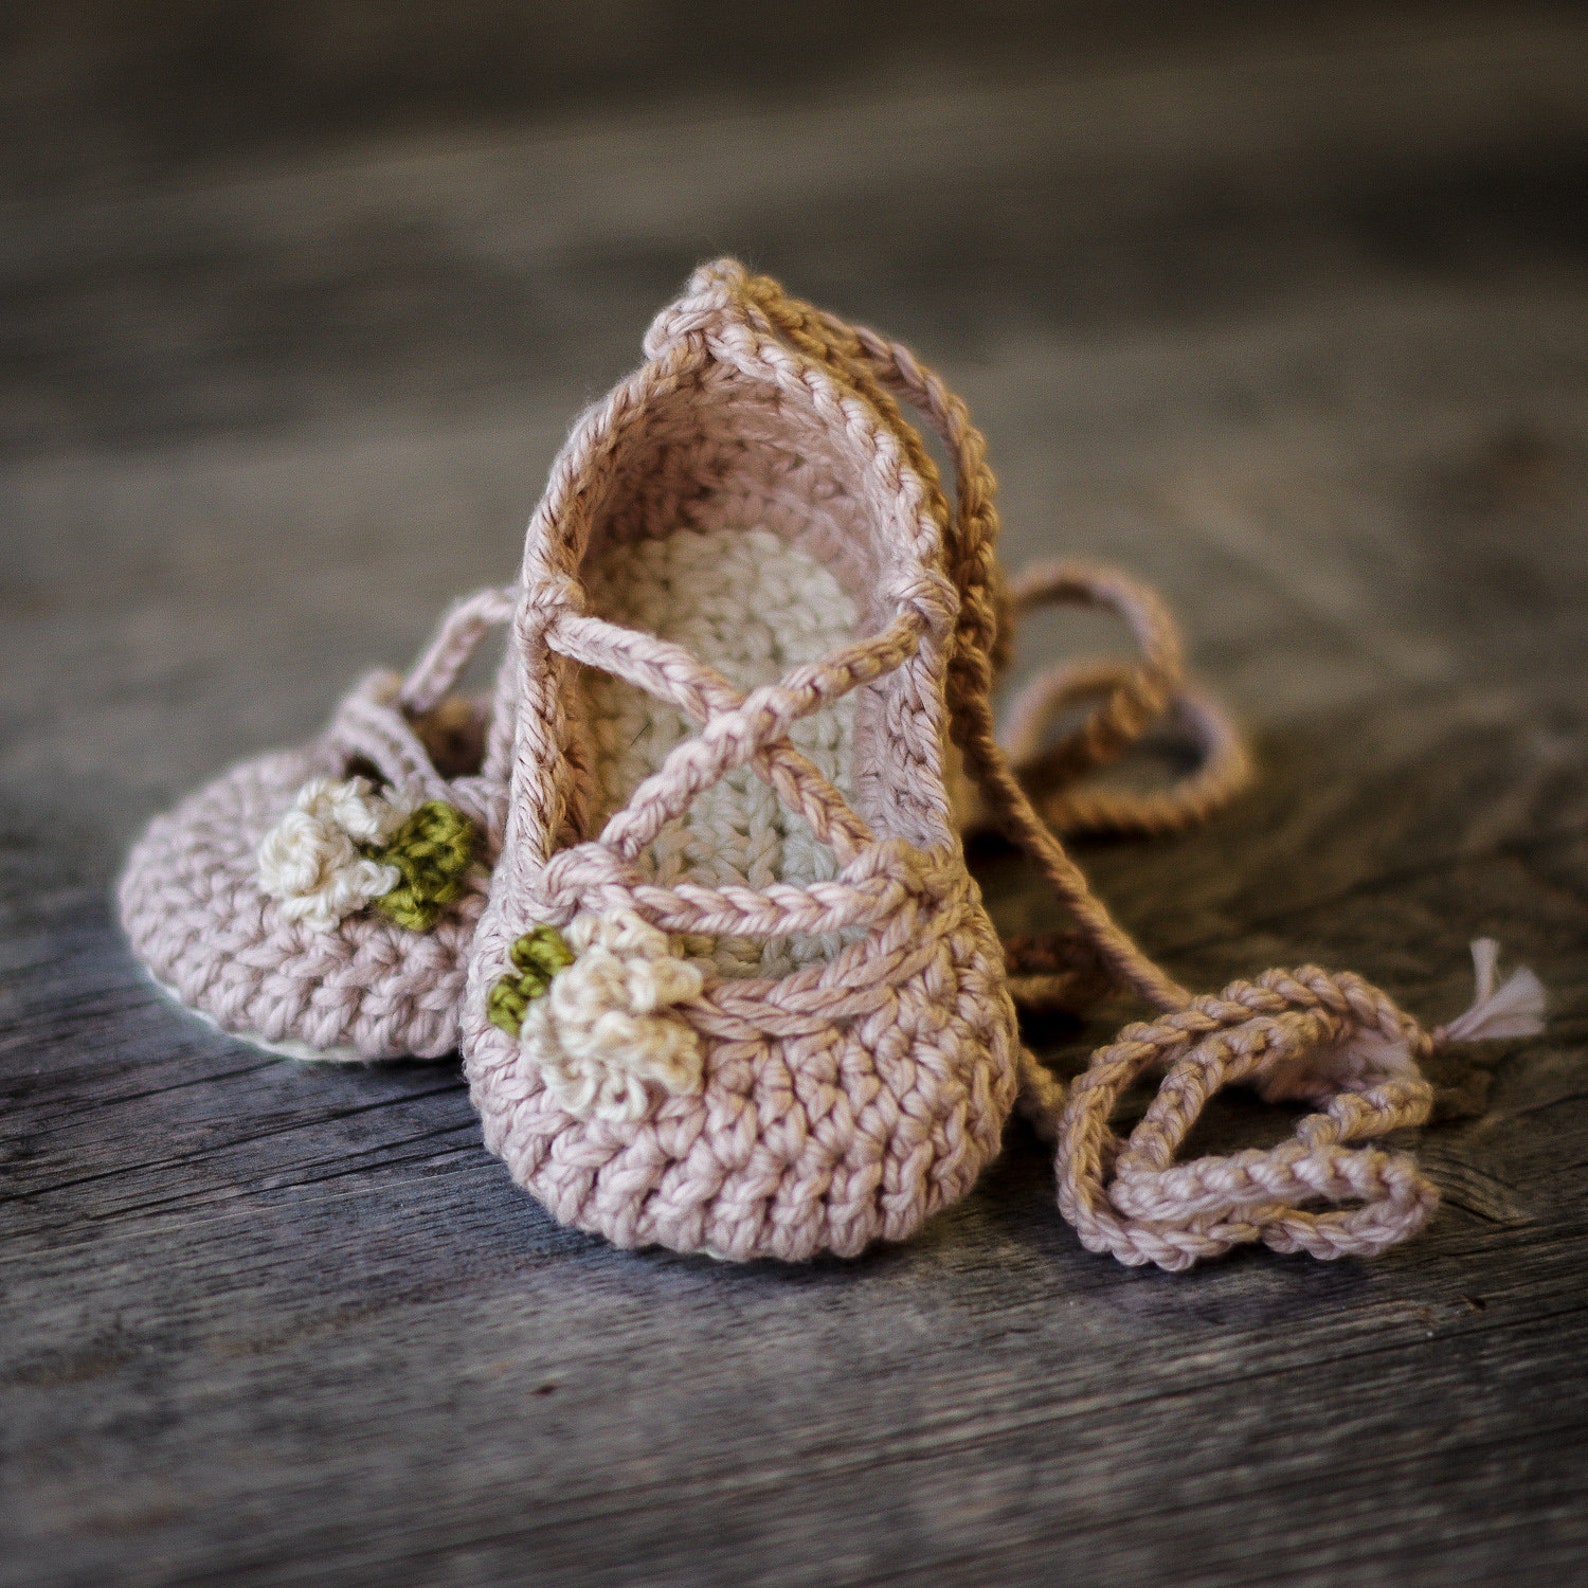 crochet pattern - strappy ballet flats - 3 variations included - baby - newborn, 3-6 and 6-12 months, instant download kc550